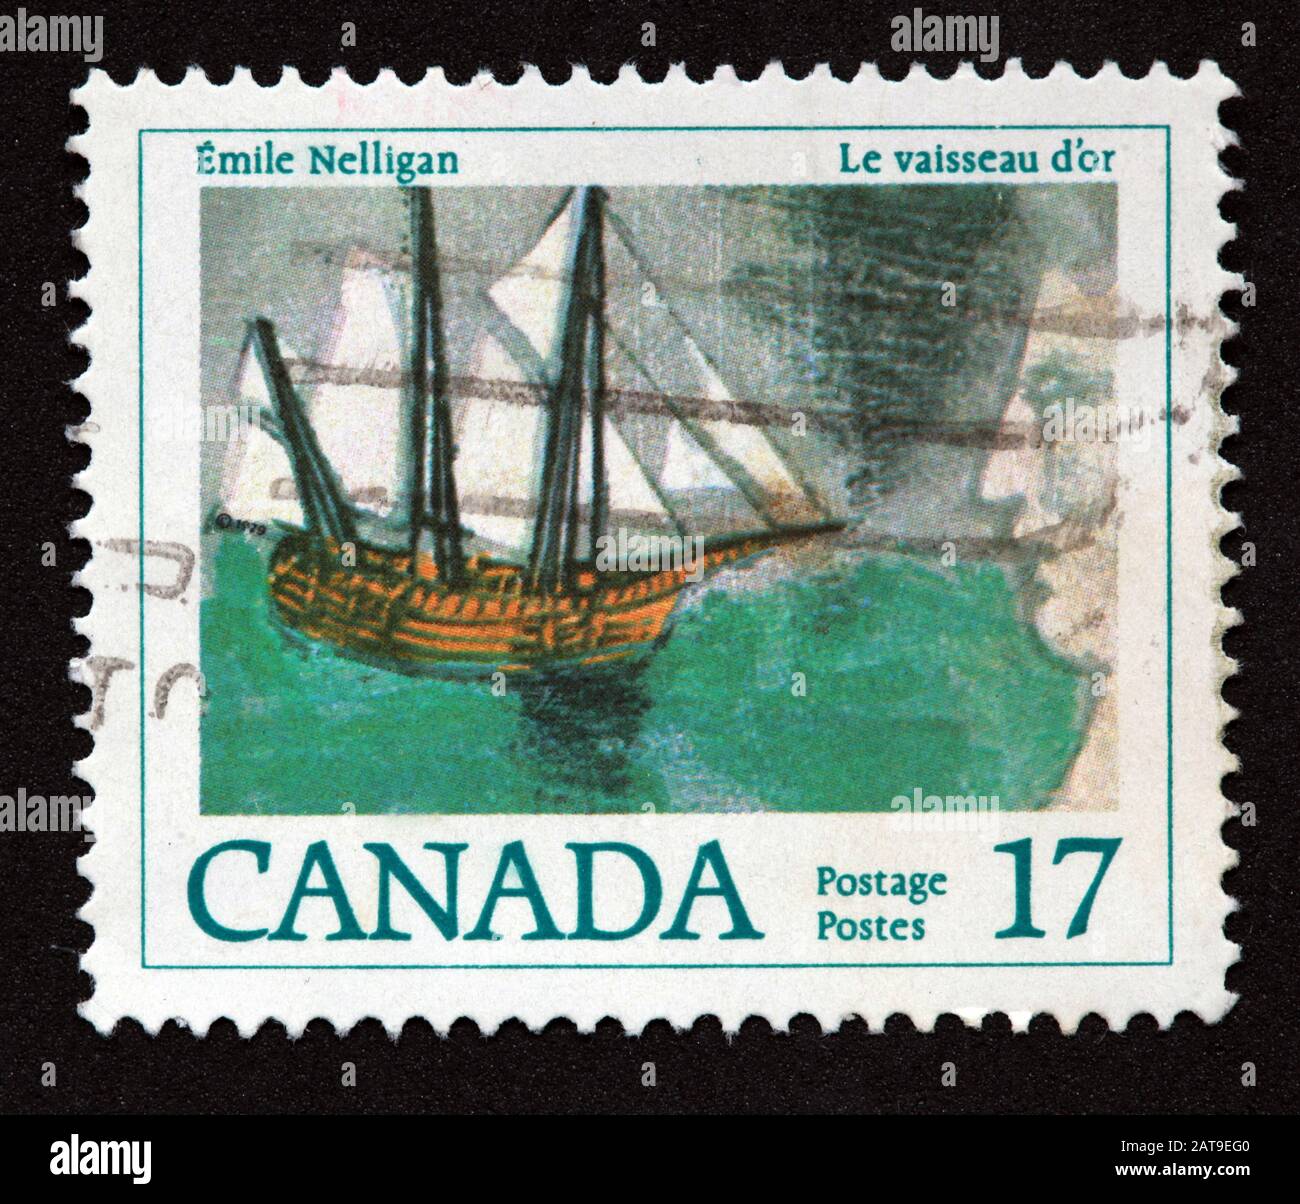 Canadian Stamp, Canada Stamp, Canada Post,used stamp, Emile Nelligan , Le vaisseau d'or Canada Postage, postes, 17, boat,ship Stock Photo